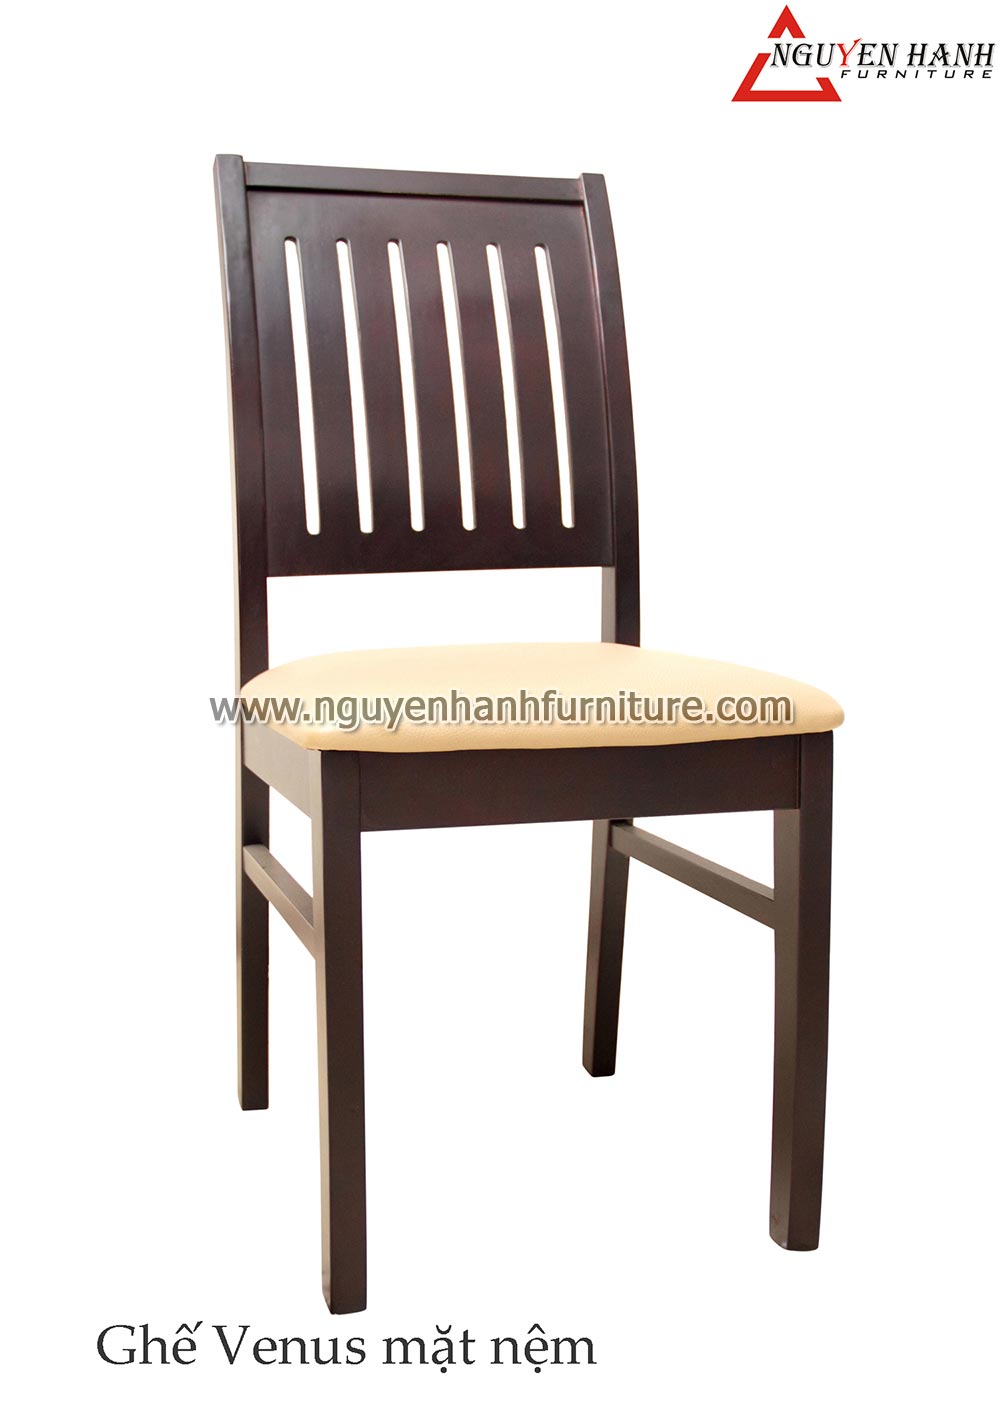 Name product: Venus chair with mattress - Dimensions:  - Description: Rubber wood, the mattress